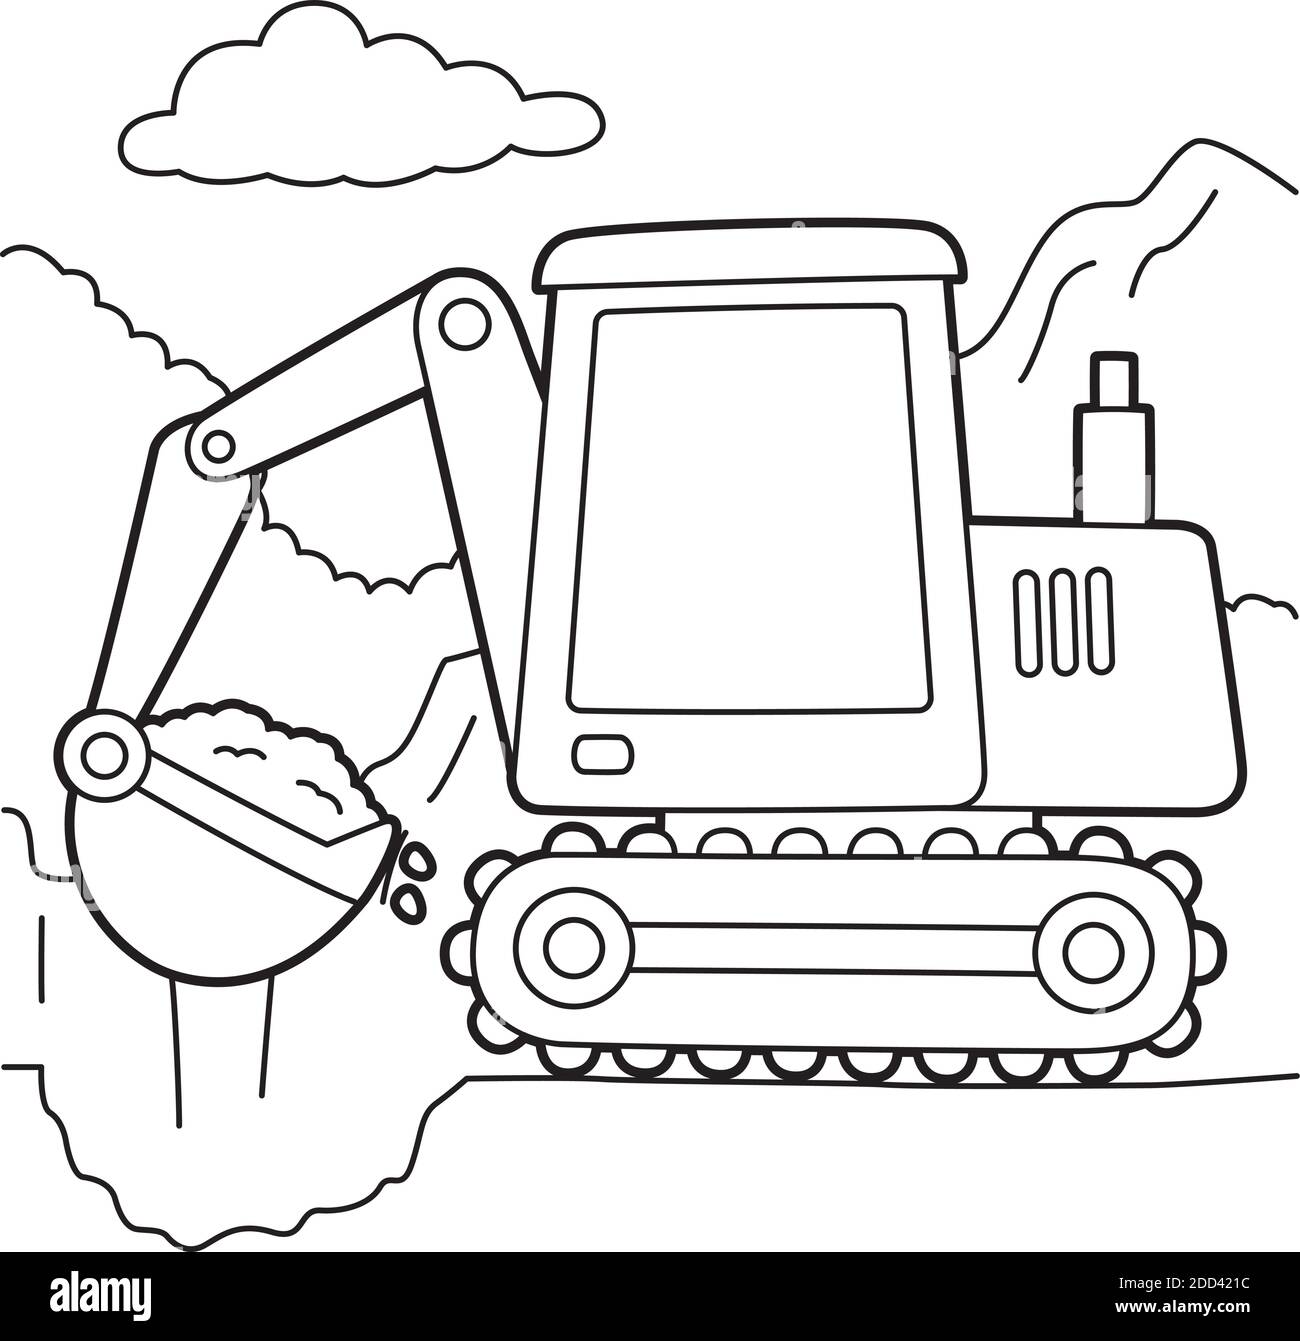 Excavator Coloring Page Stock Vector Image & Art   Alamy